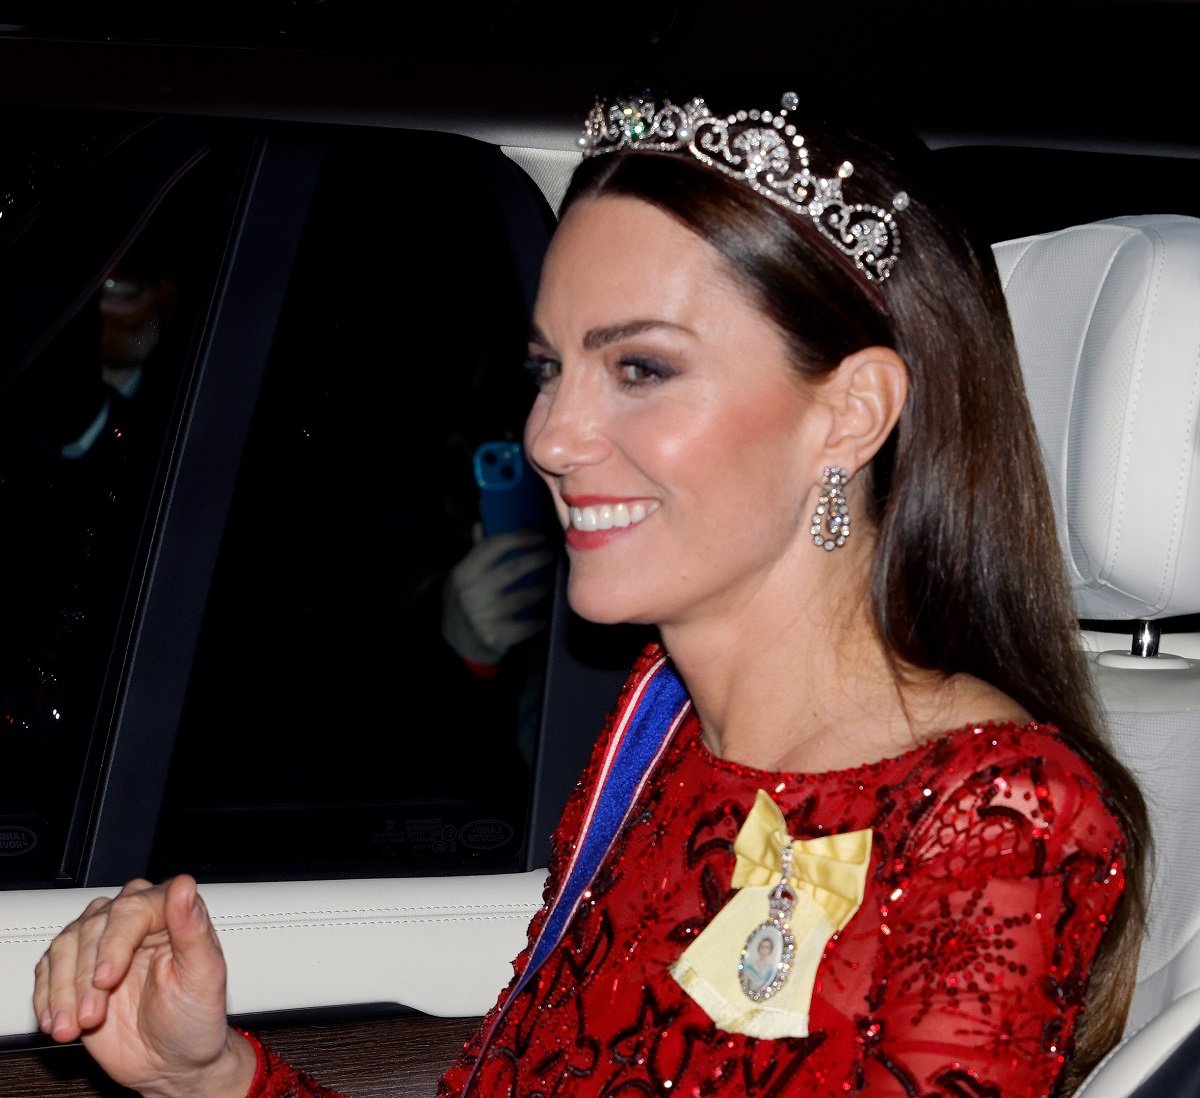 Kate Middleton wearing the Lotus Flower Tiara as she's being driven to the annual Reception for Members of the Diplomatic Corps at Buckingham Palace